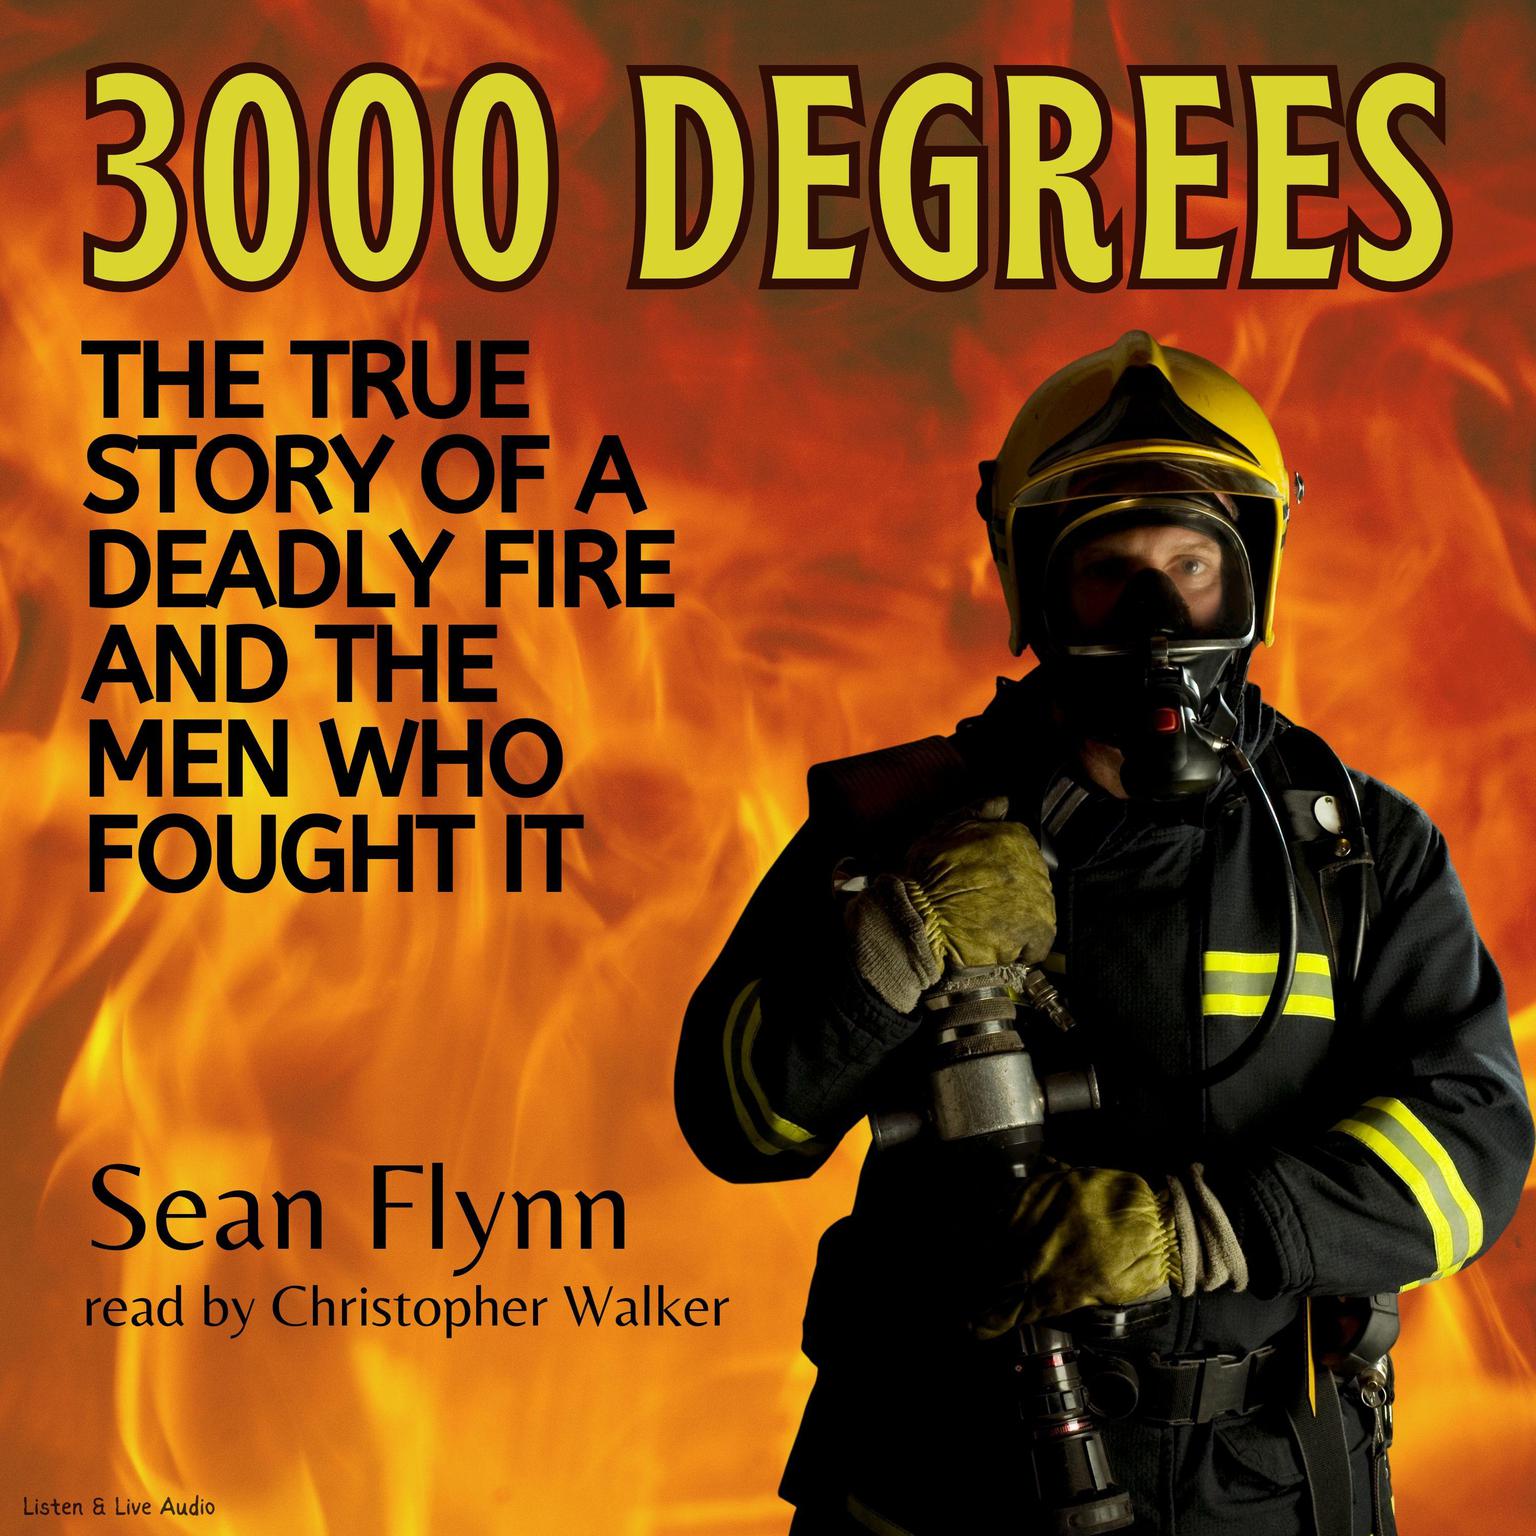 3000 Degrees (Abridged): The True Story of a Deadly Fire and the Men Who Fought It Audiobook, by Sean Flynn